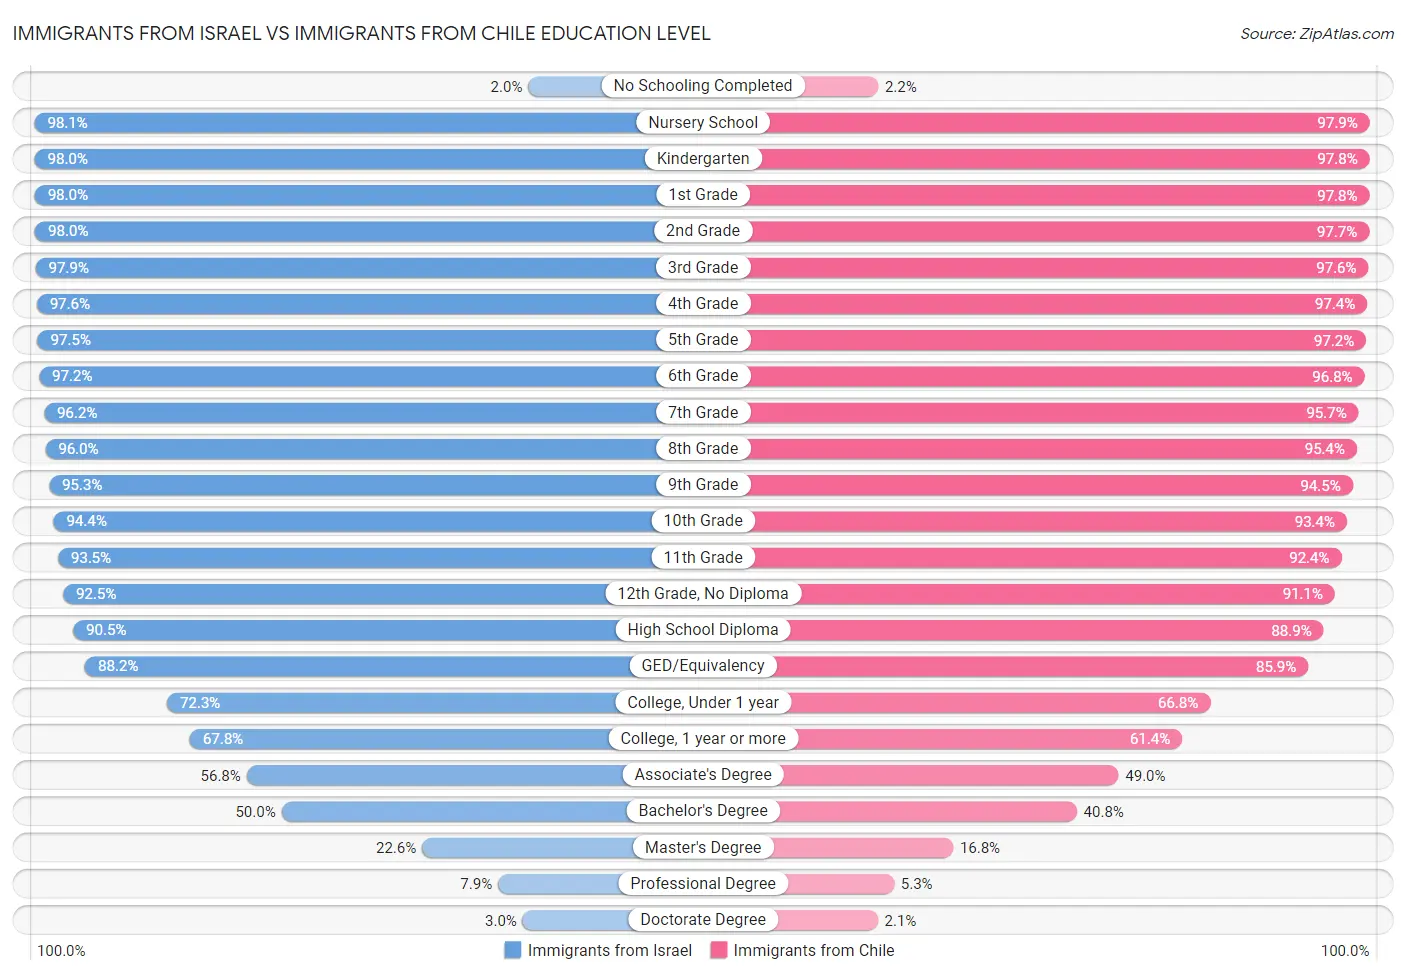 Immigrants from Israel vs Immigrants from Chile Education Level